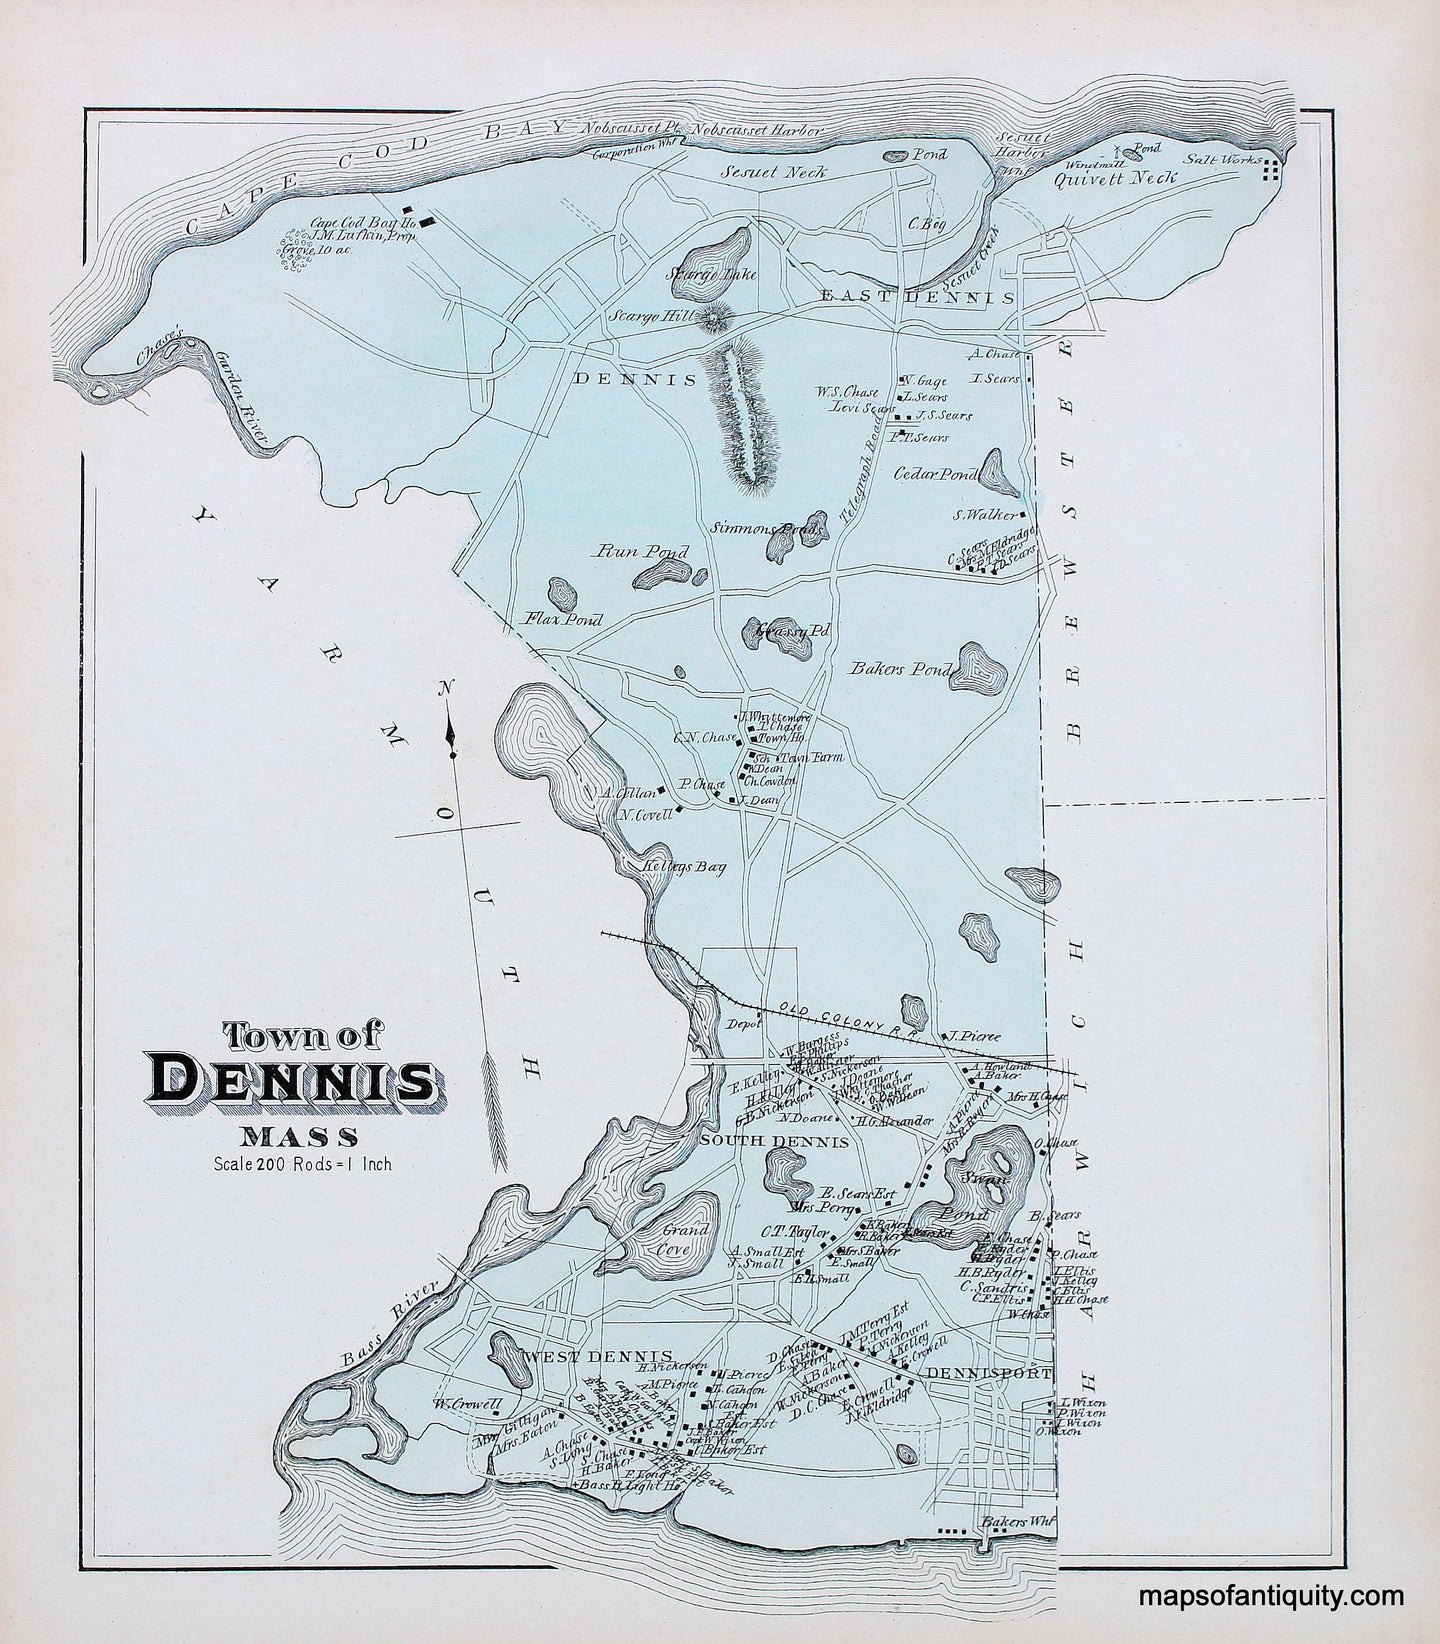 Reproduction-Map-Town-of-Dennis-p.-46-Town-and-Village-Maps-Atlas-of-Barnstable-County-Walker-1880.